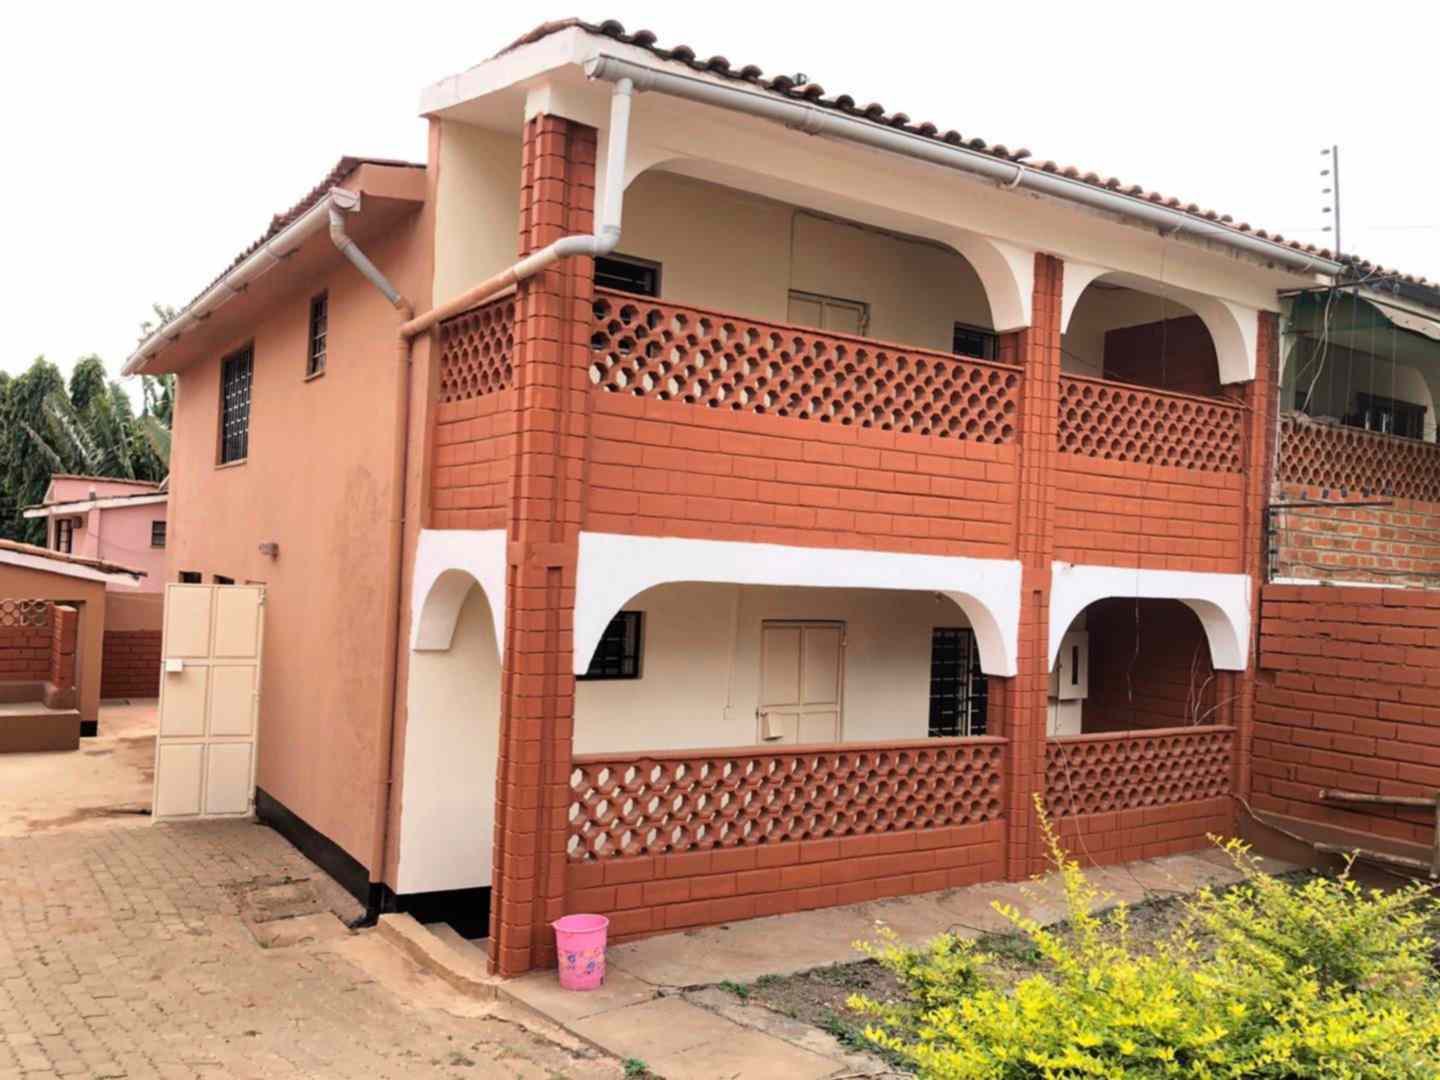 3 bedroom townhouse to let in kasarani